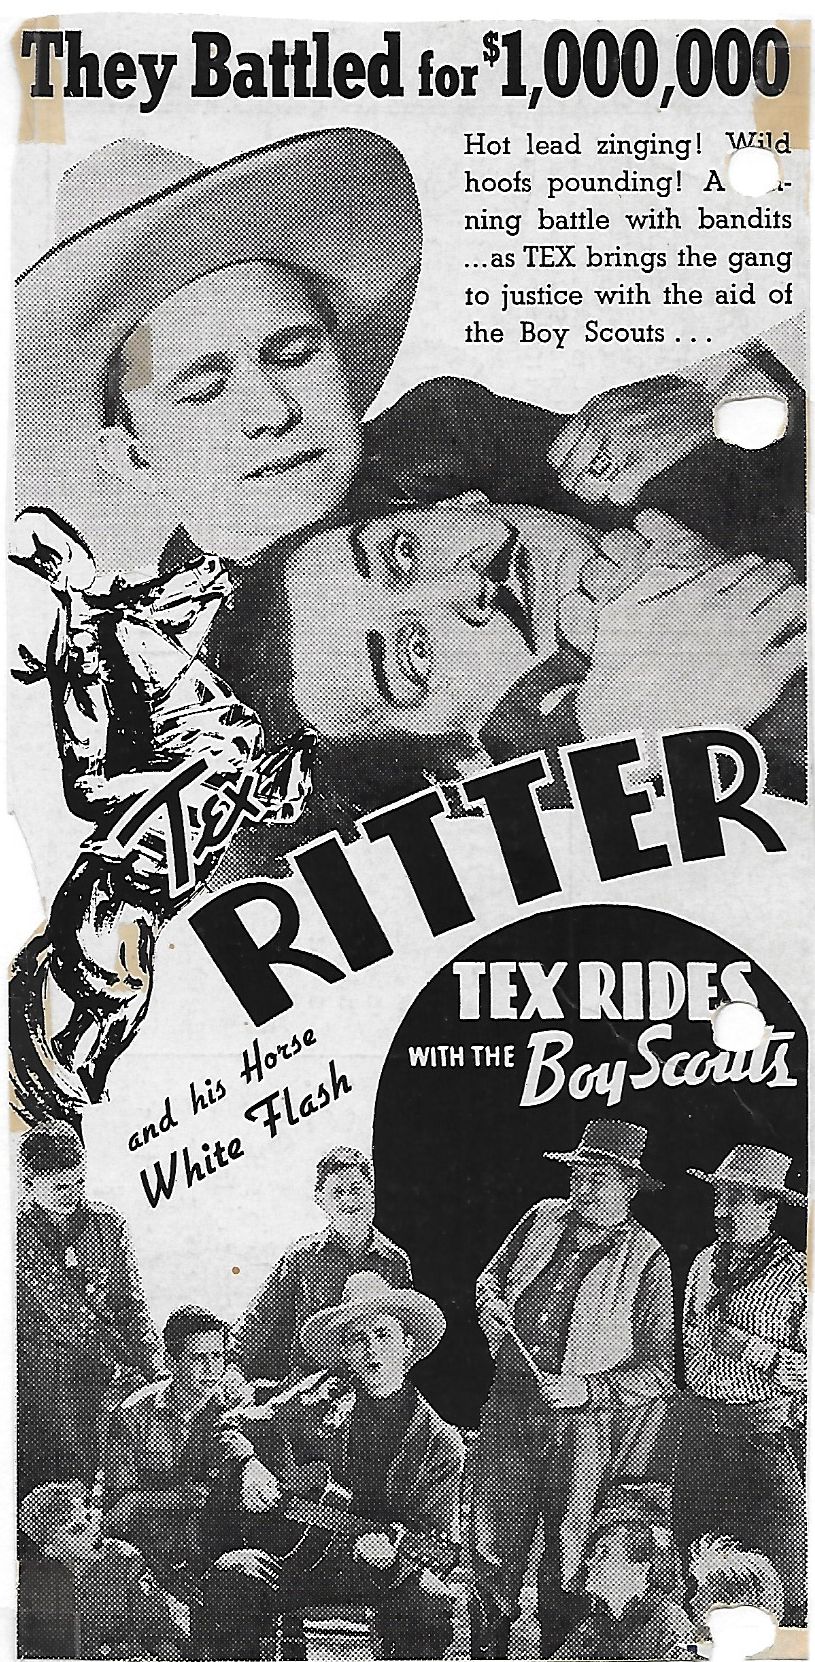 Tex Rides with the Boy Scouts (1937) Screenshot 4 